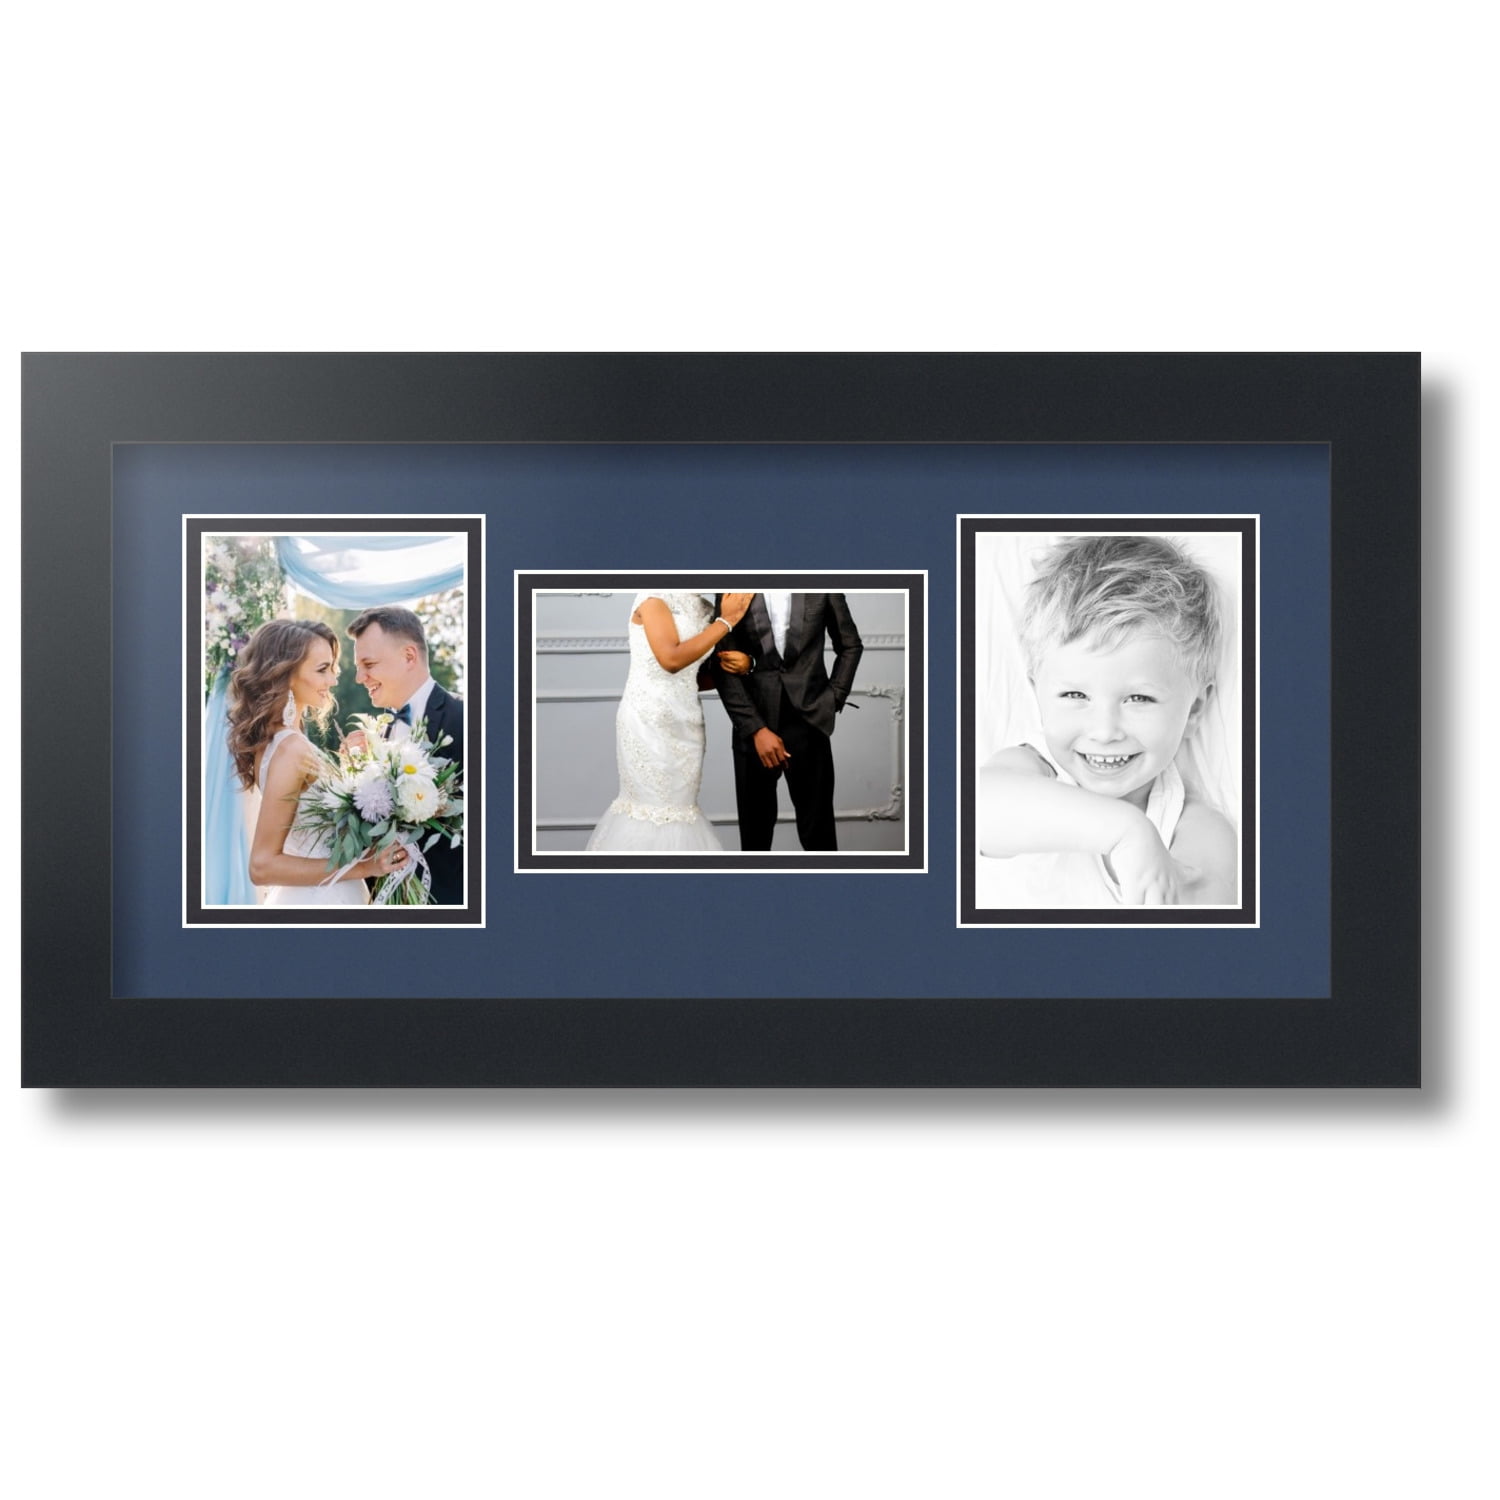 Baby Boy Multi Aperture Picture Frame Holds 3 Photos 